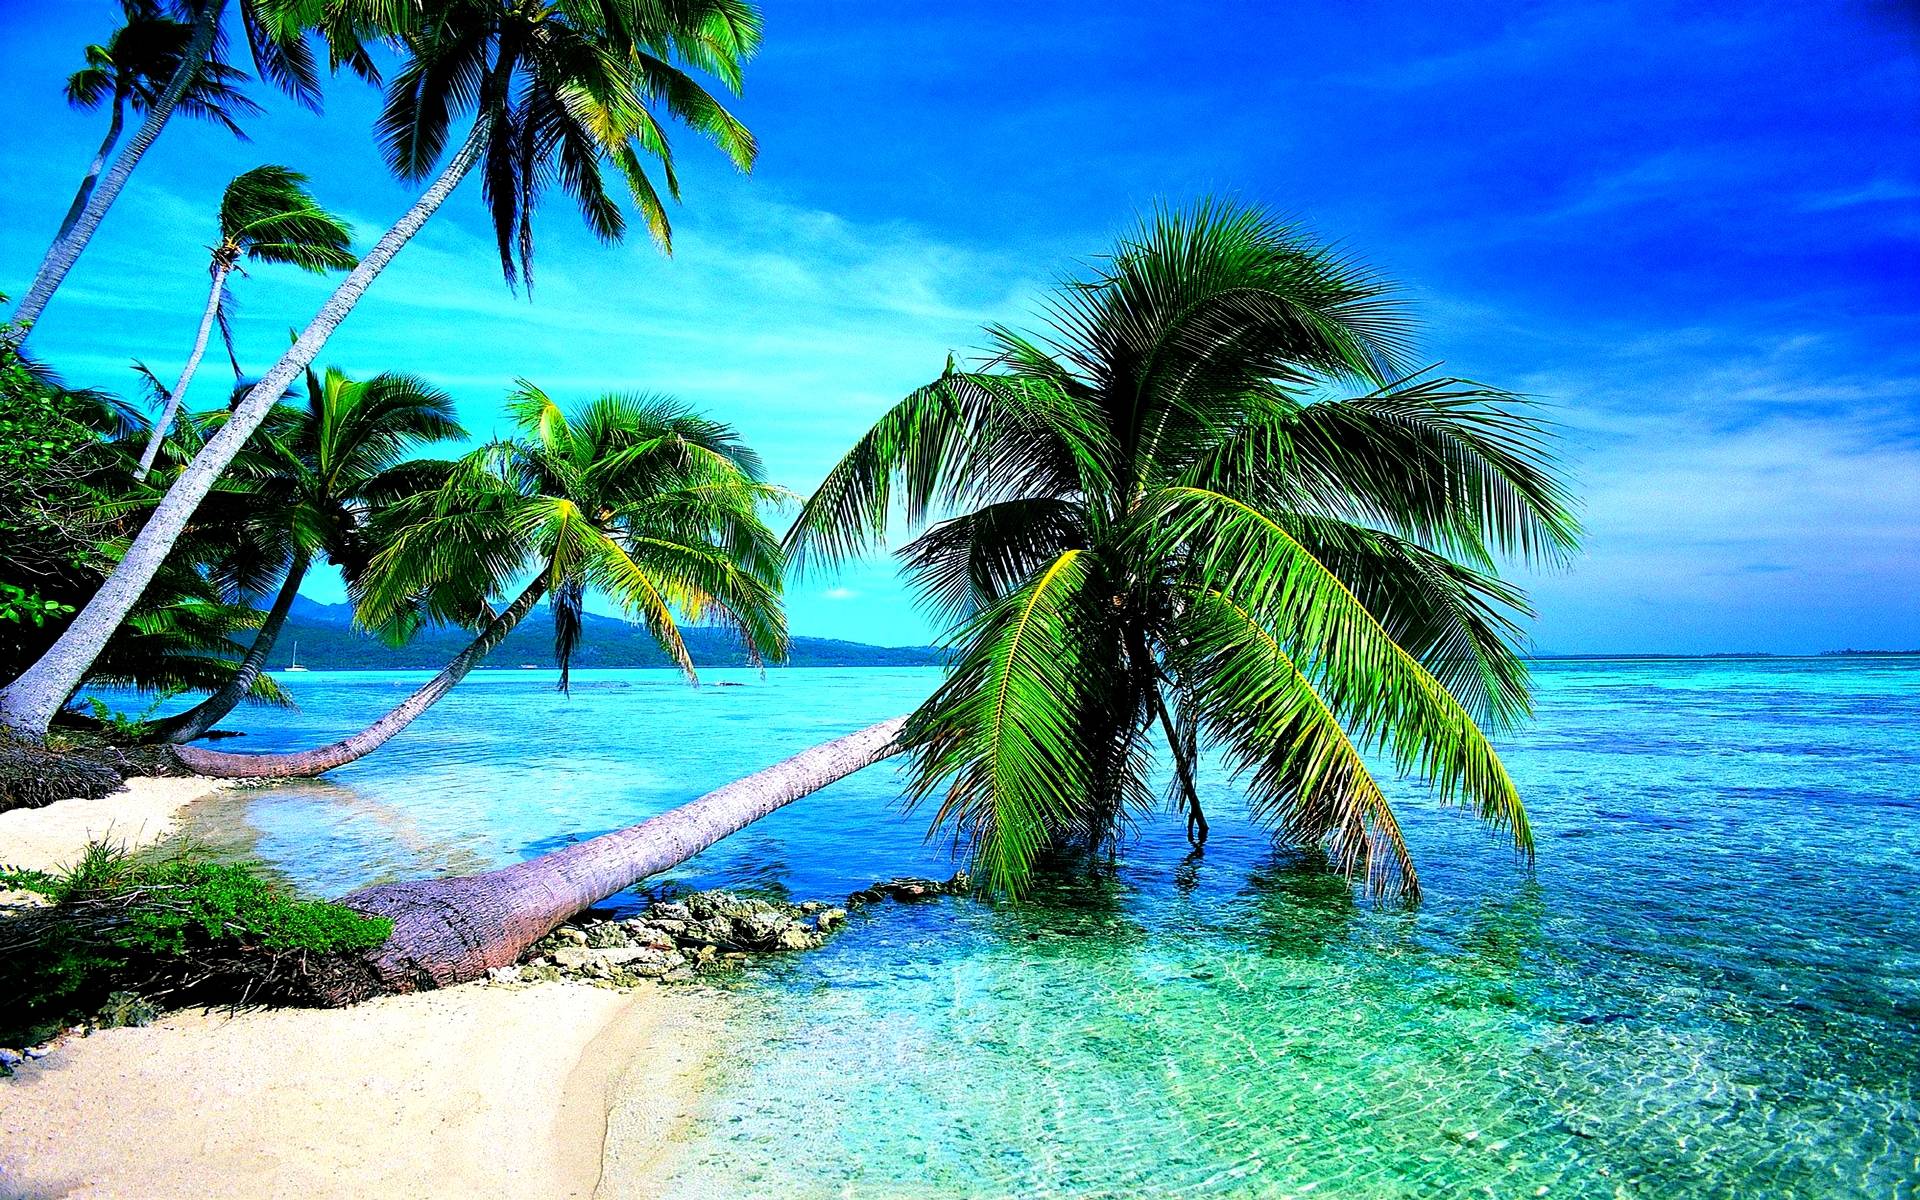 tropical beach image wallpaper. Desktop Background for Free HD